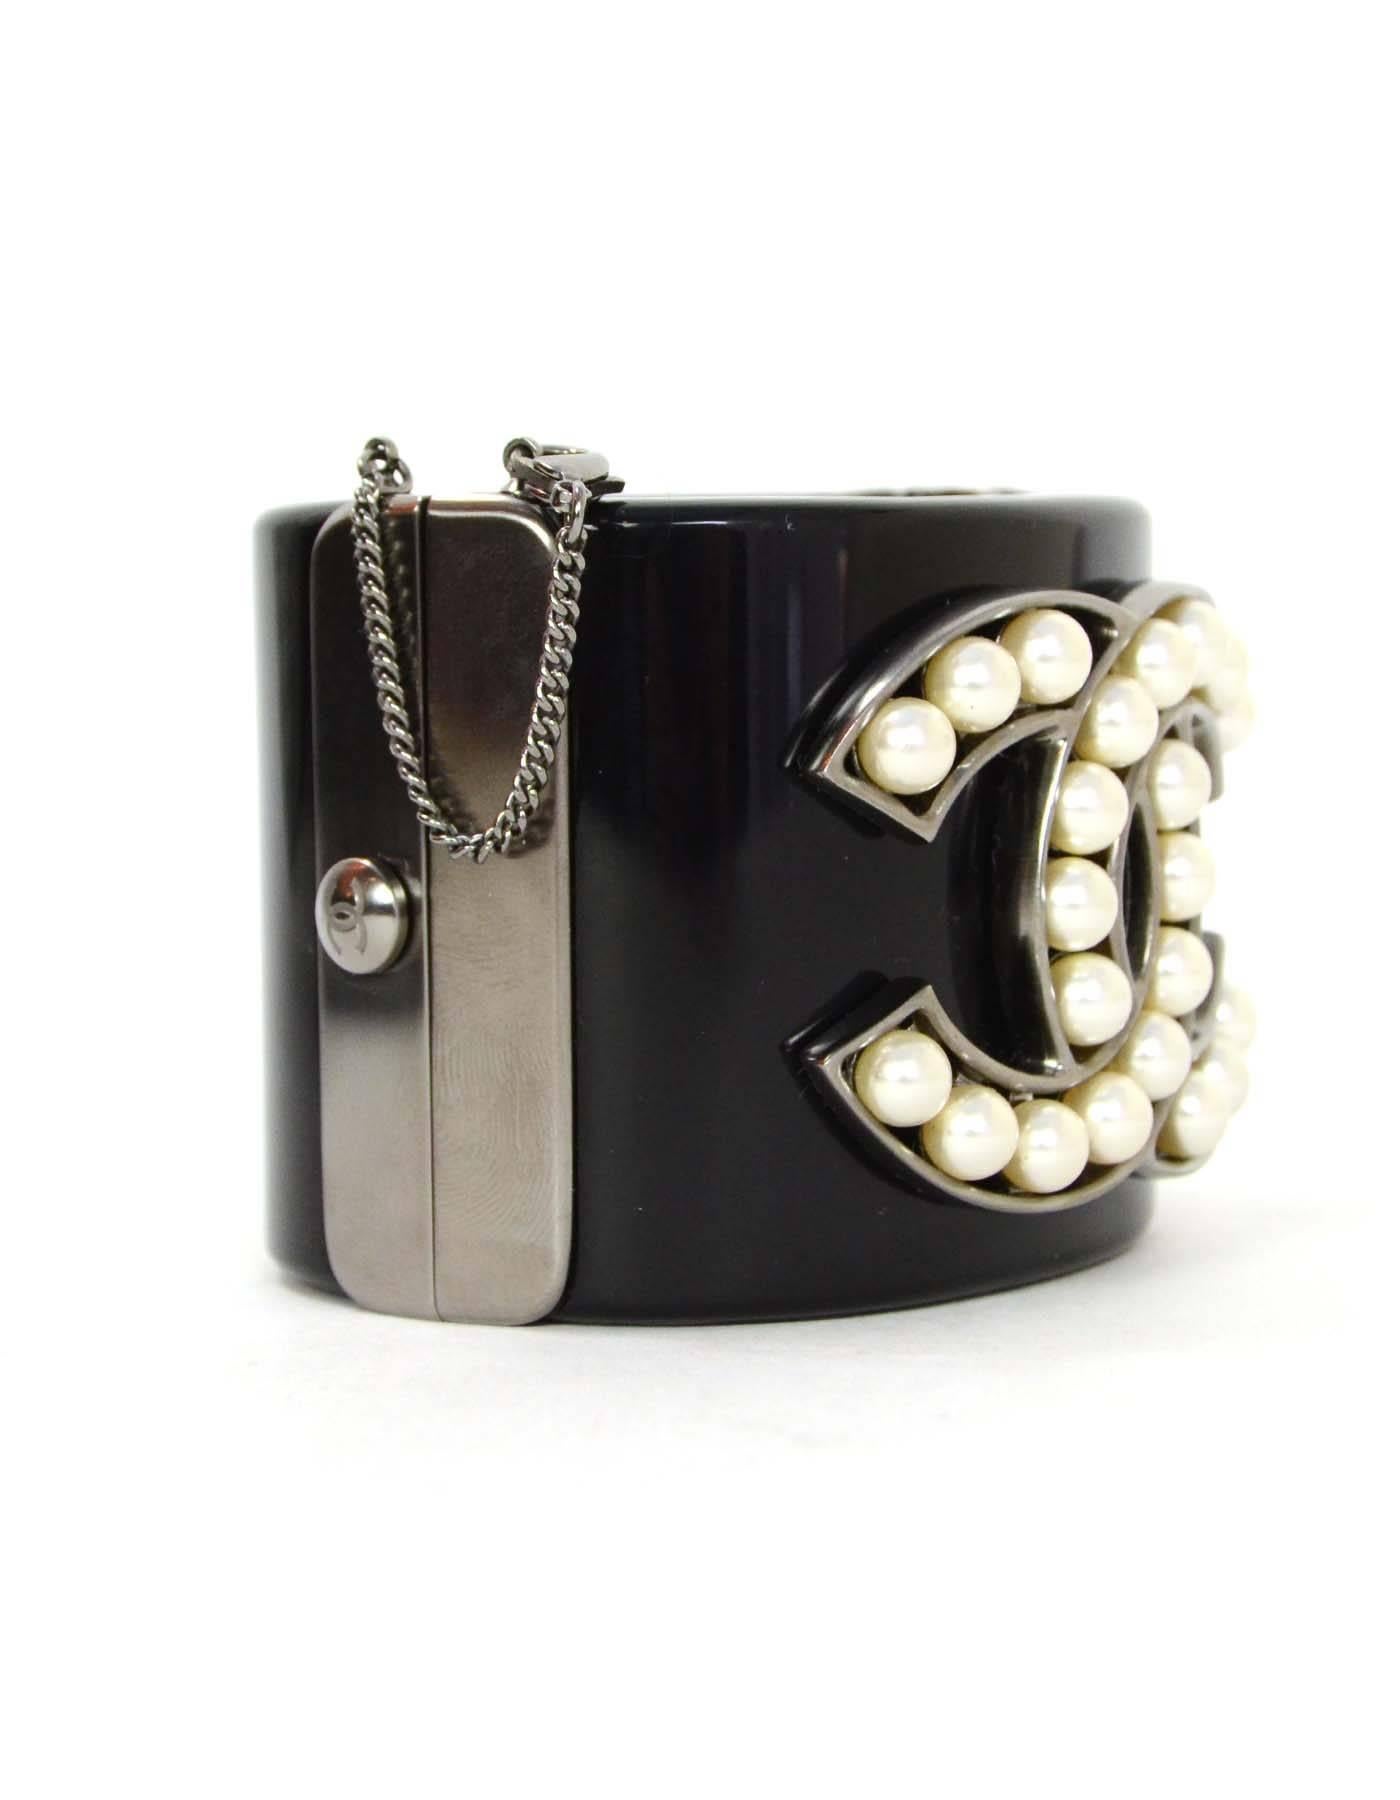 Chanel Pearl & Black Resin CC Cuff
Features faux pearls in shape of large CC pendant on cuff
Made In: Italy
Year of Production: 2014
Color: Black, ivory, ruthenium
Materials: Resin, metal, and faux pearl
Closure: Push lock with lobster claw